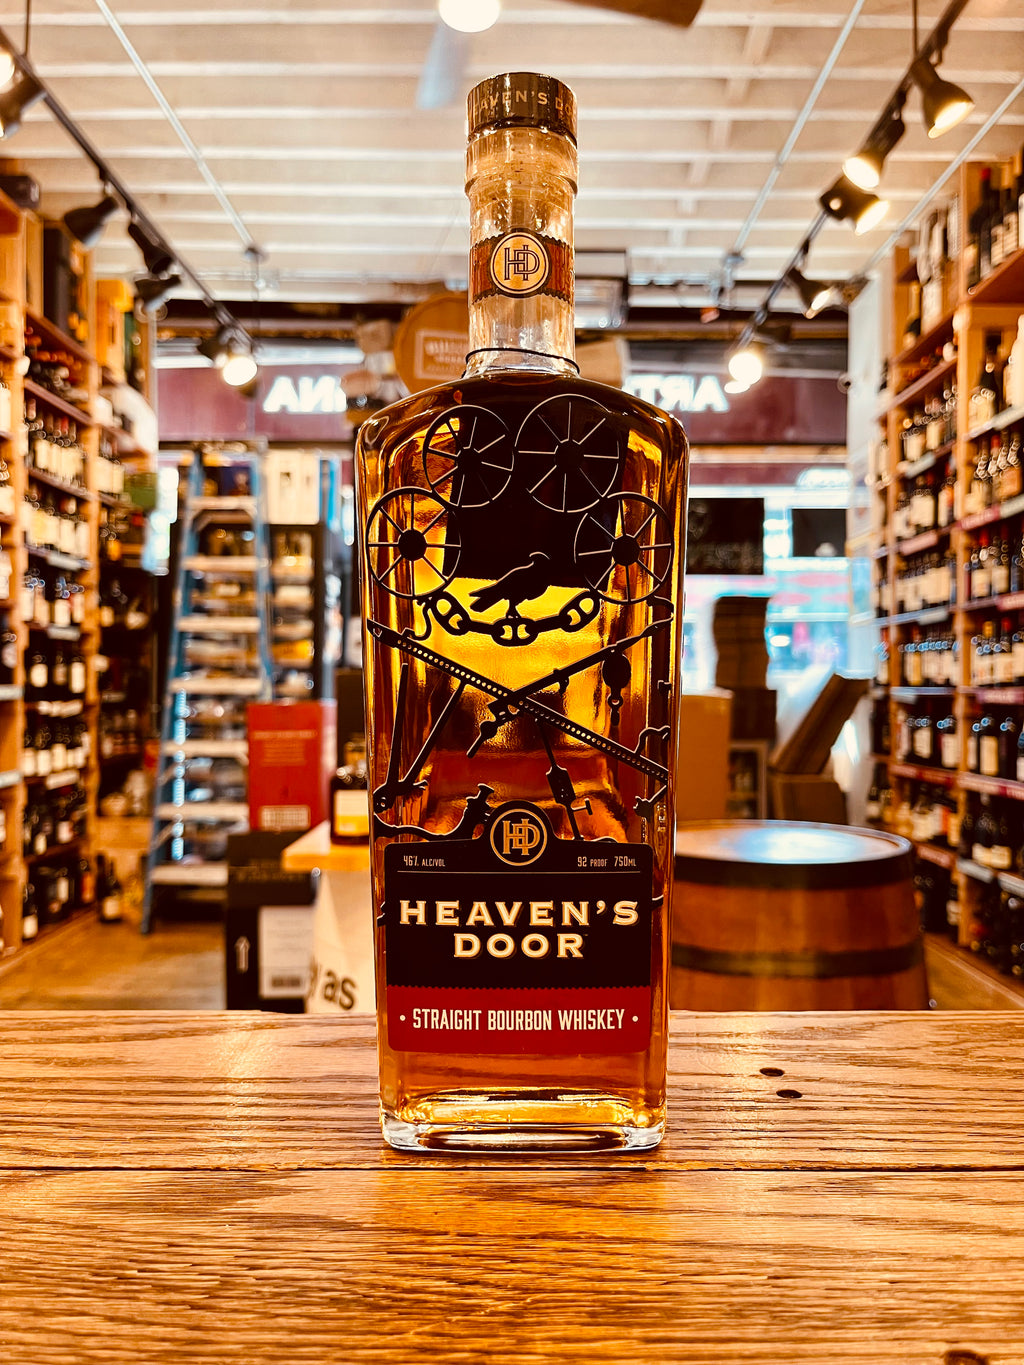 Heaven's Door Tennessee Straight Bourbon Whiskey 750mL a tall flat surfaced squared clear glass bottle with a red label and black graphic on the face of it